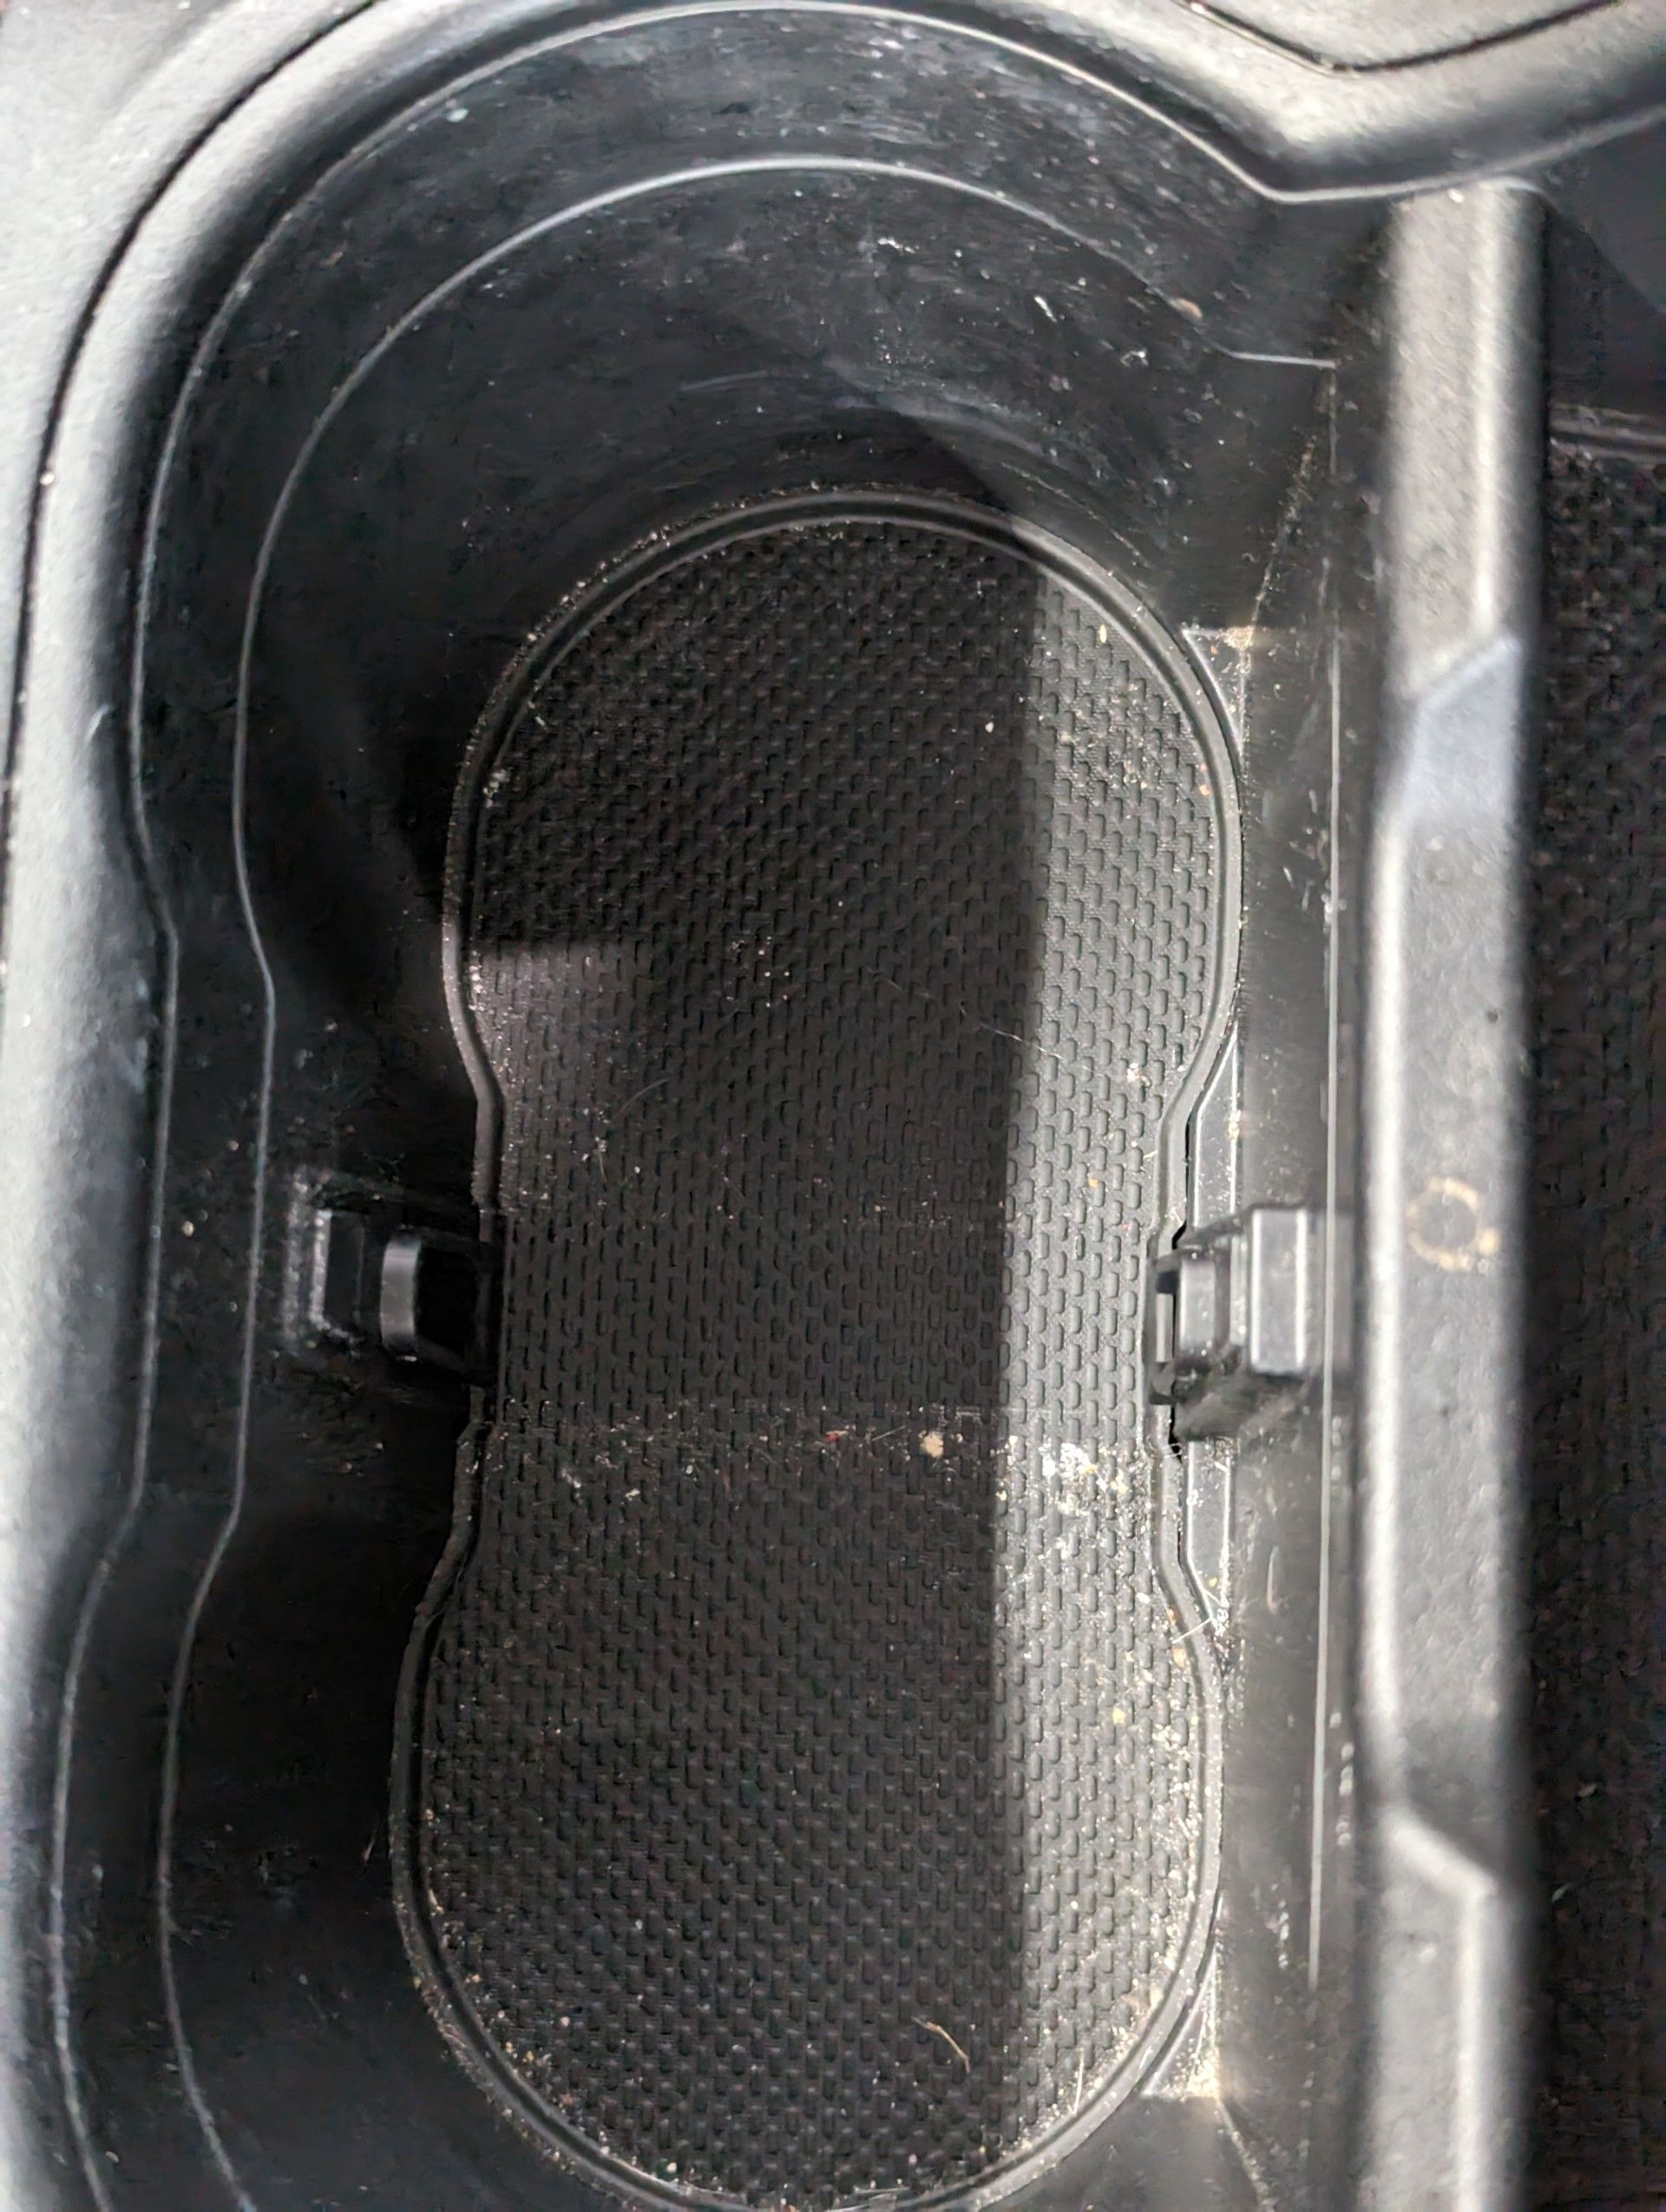 Before Interior Detailing - A close up of a cup holder in a car with two cups in it .